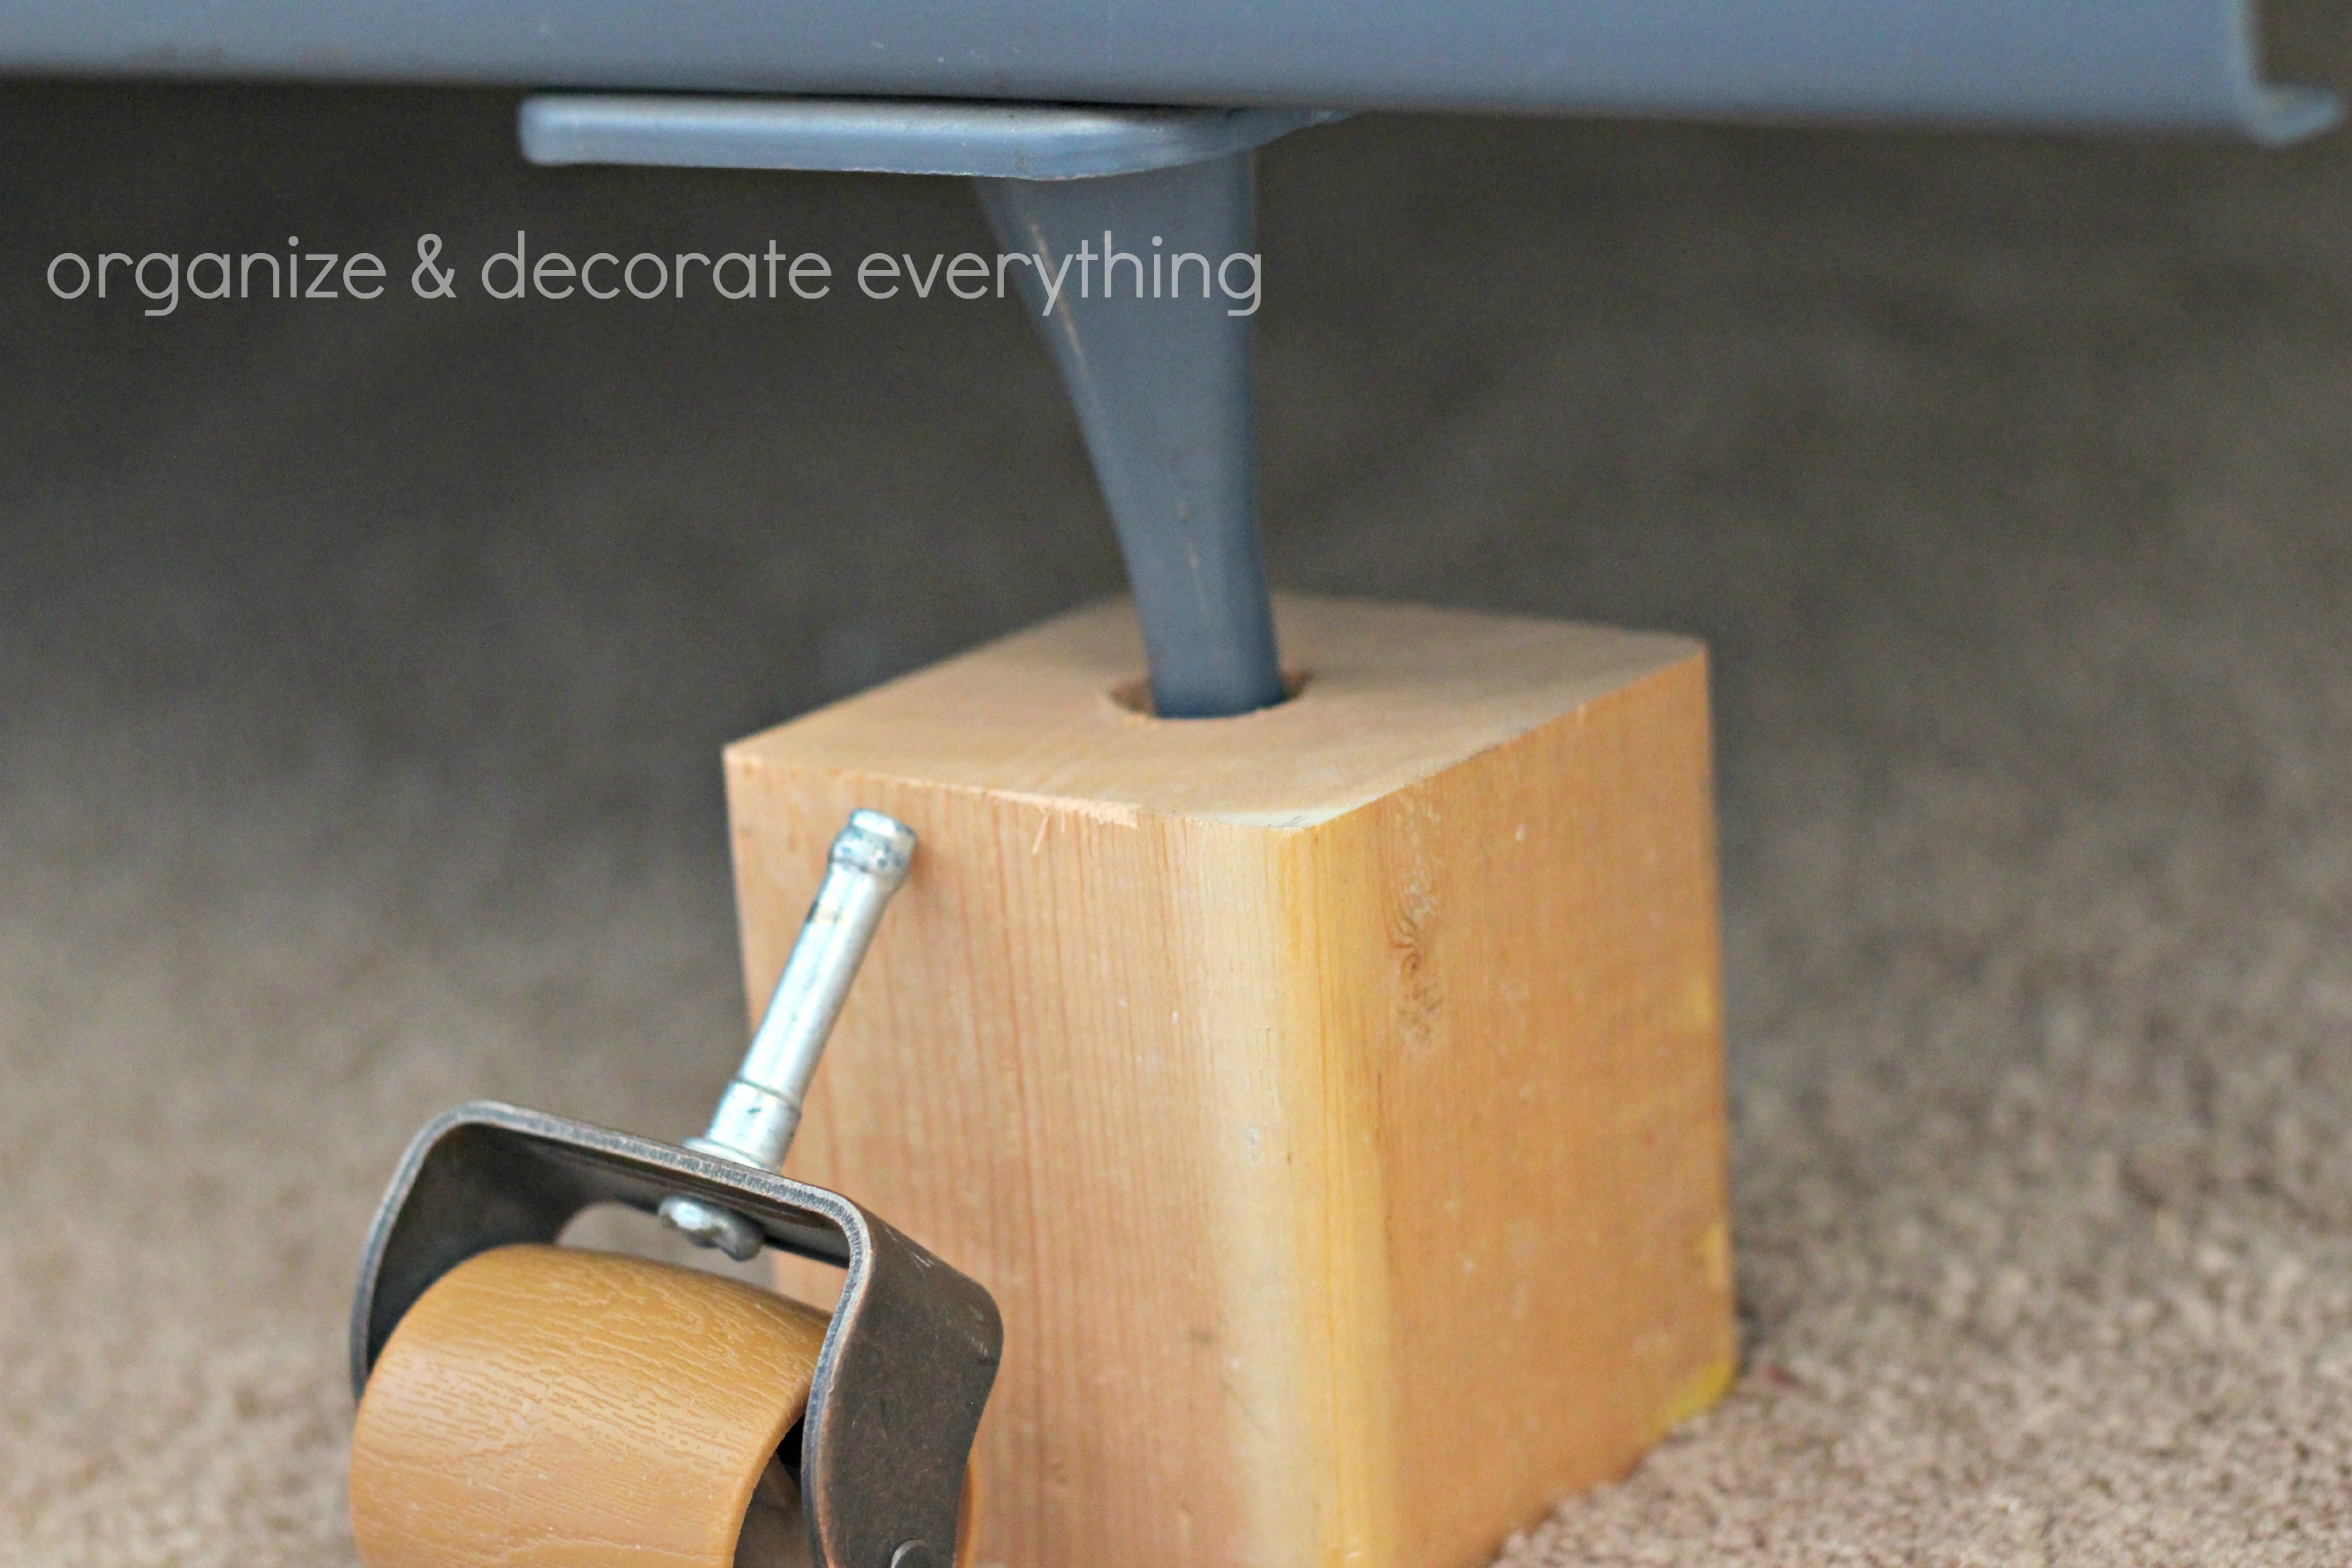 Diy Bed Risers Organize And Decorate, King Size Bed Risers